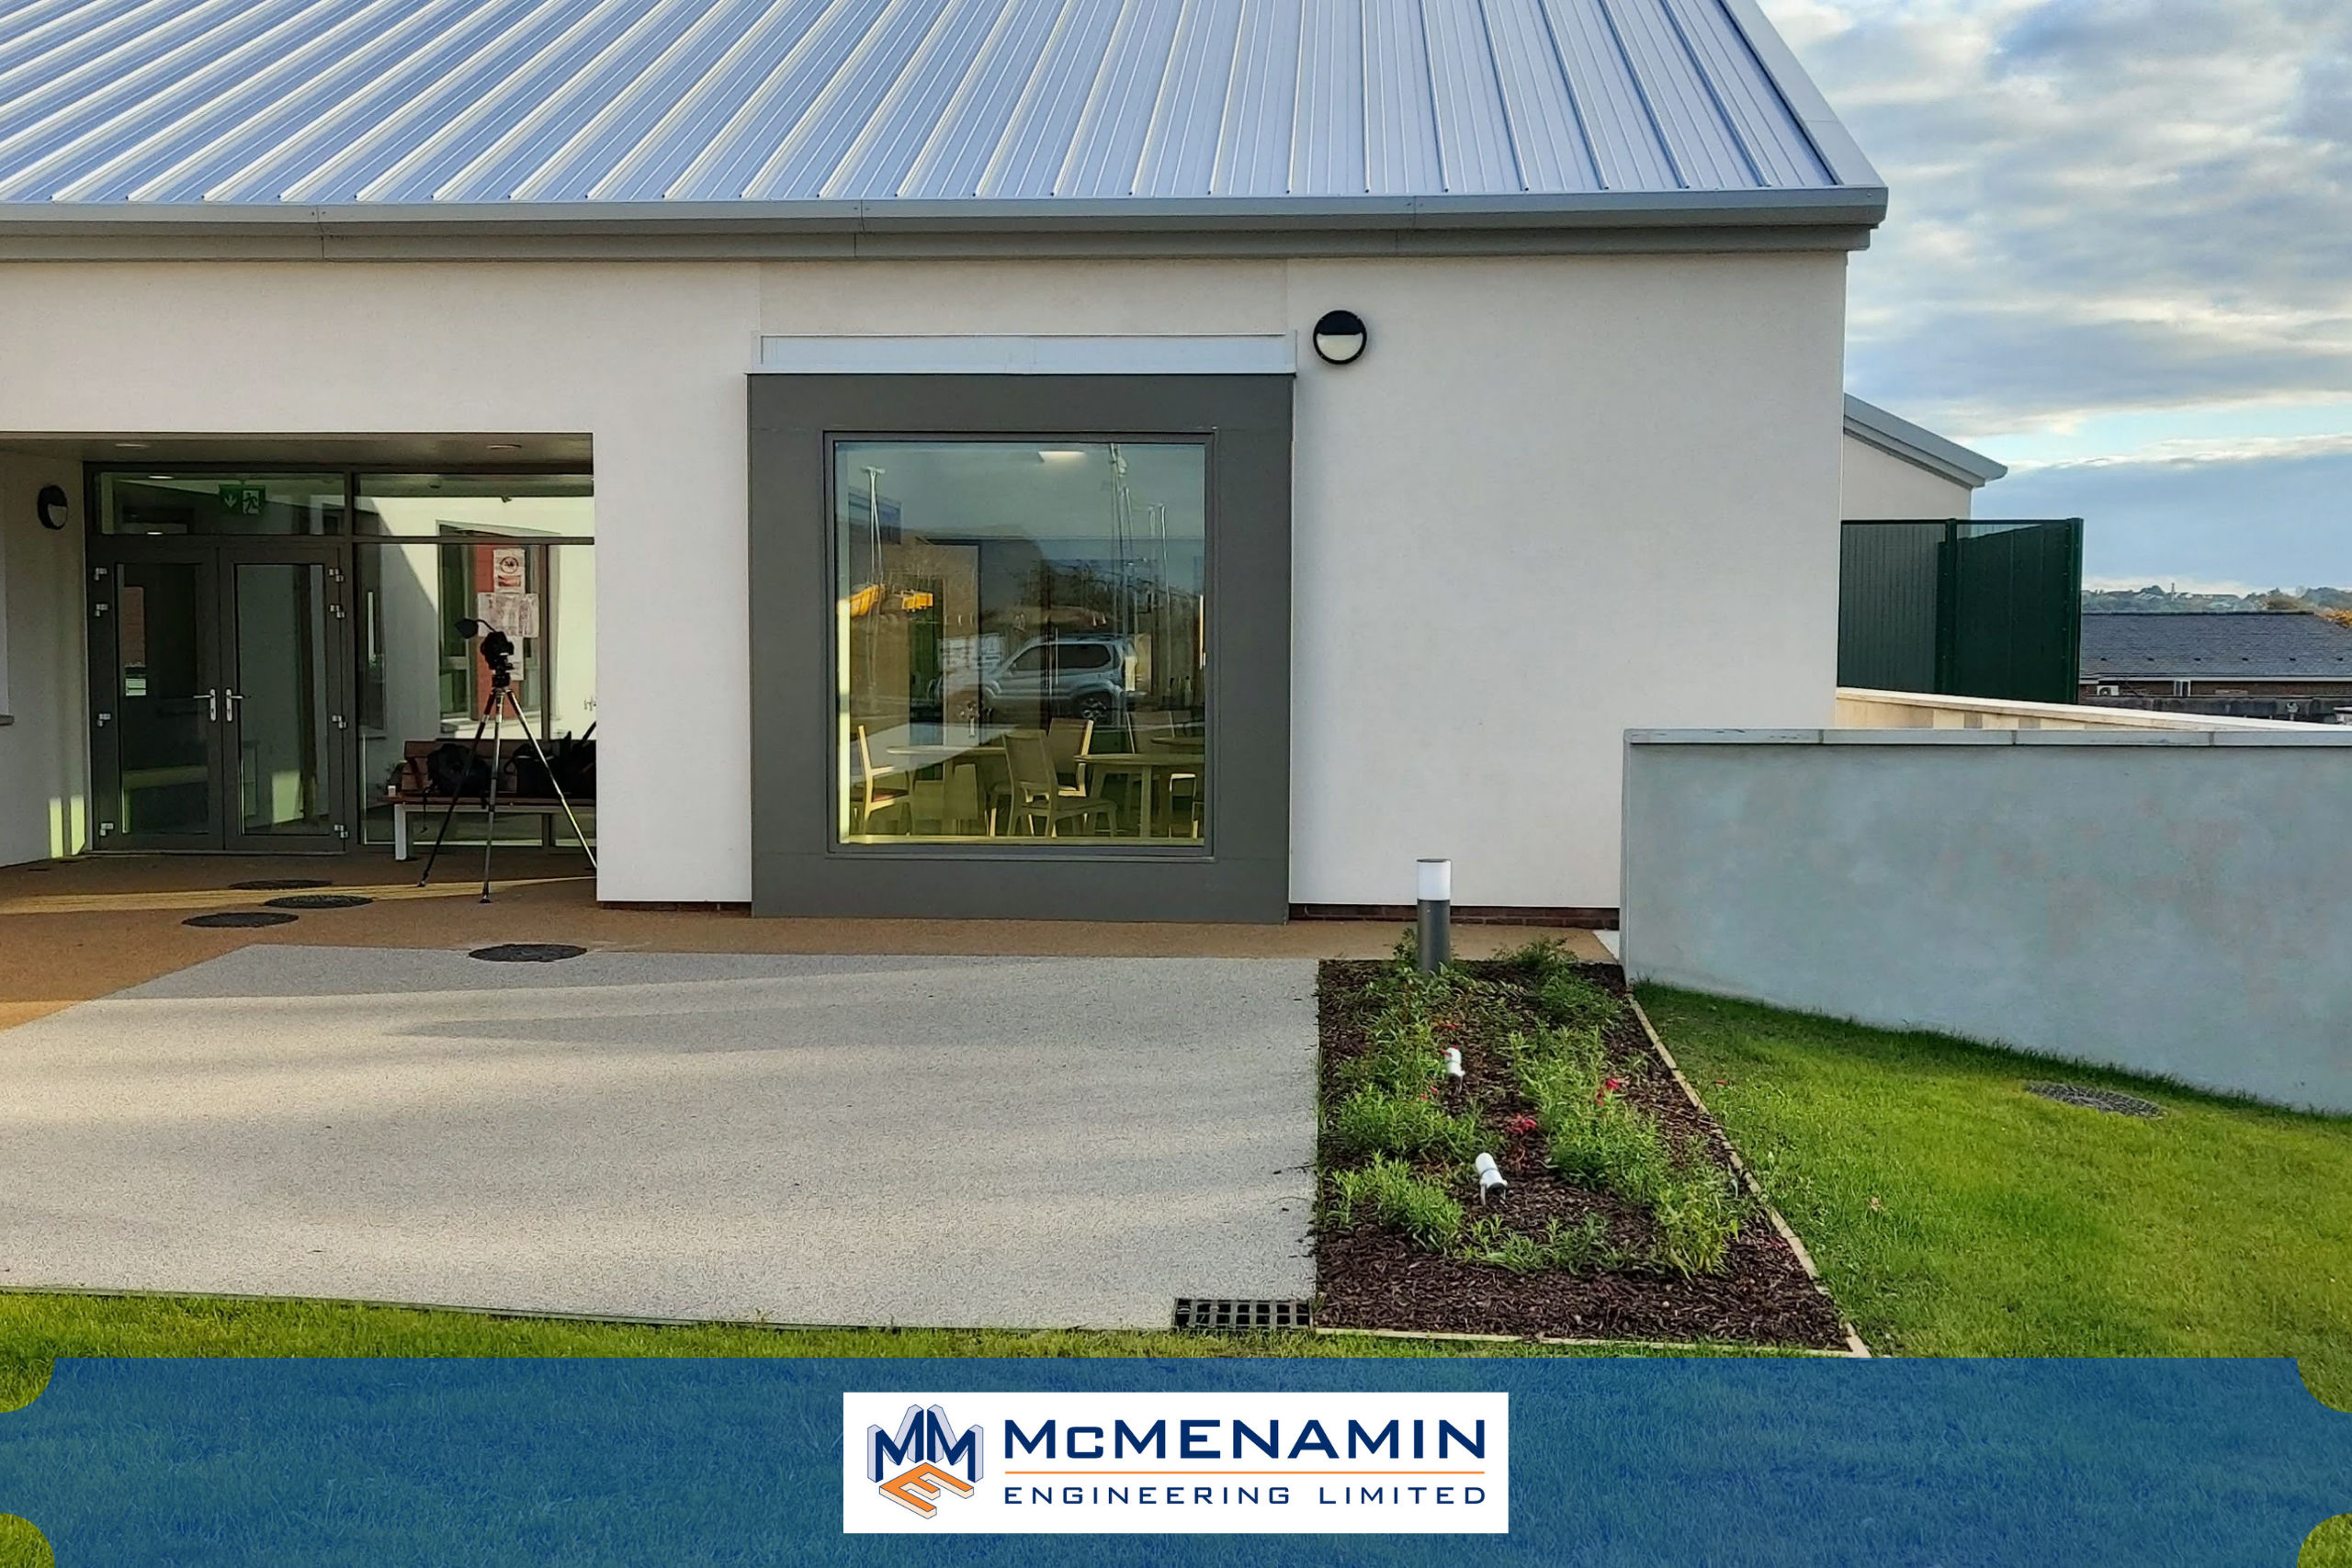 Steel solutions provided by McMenamin Engineering